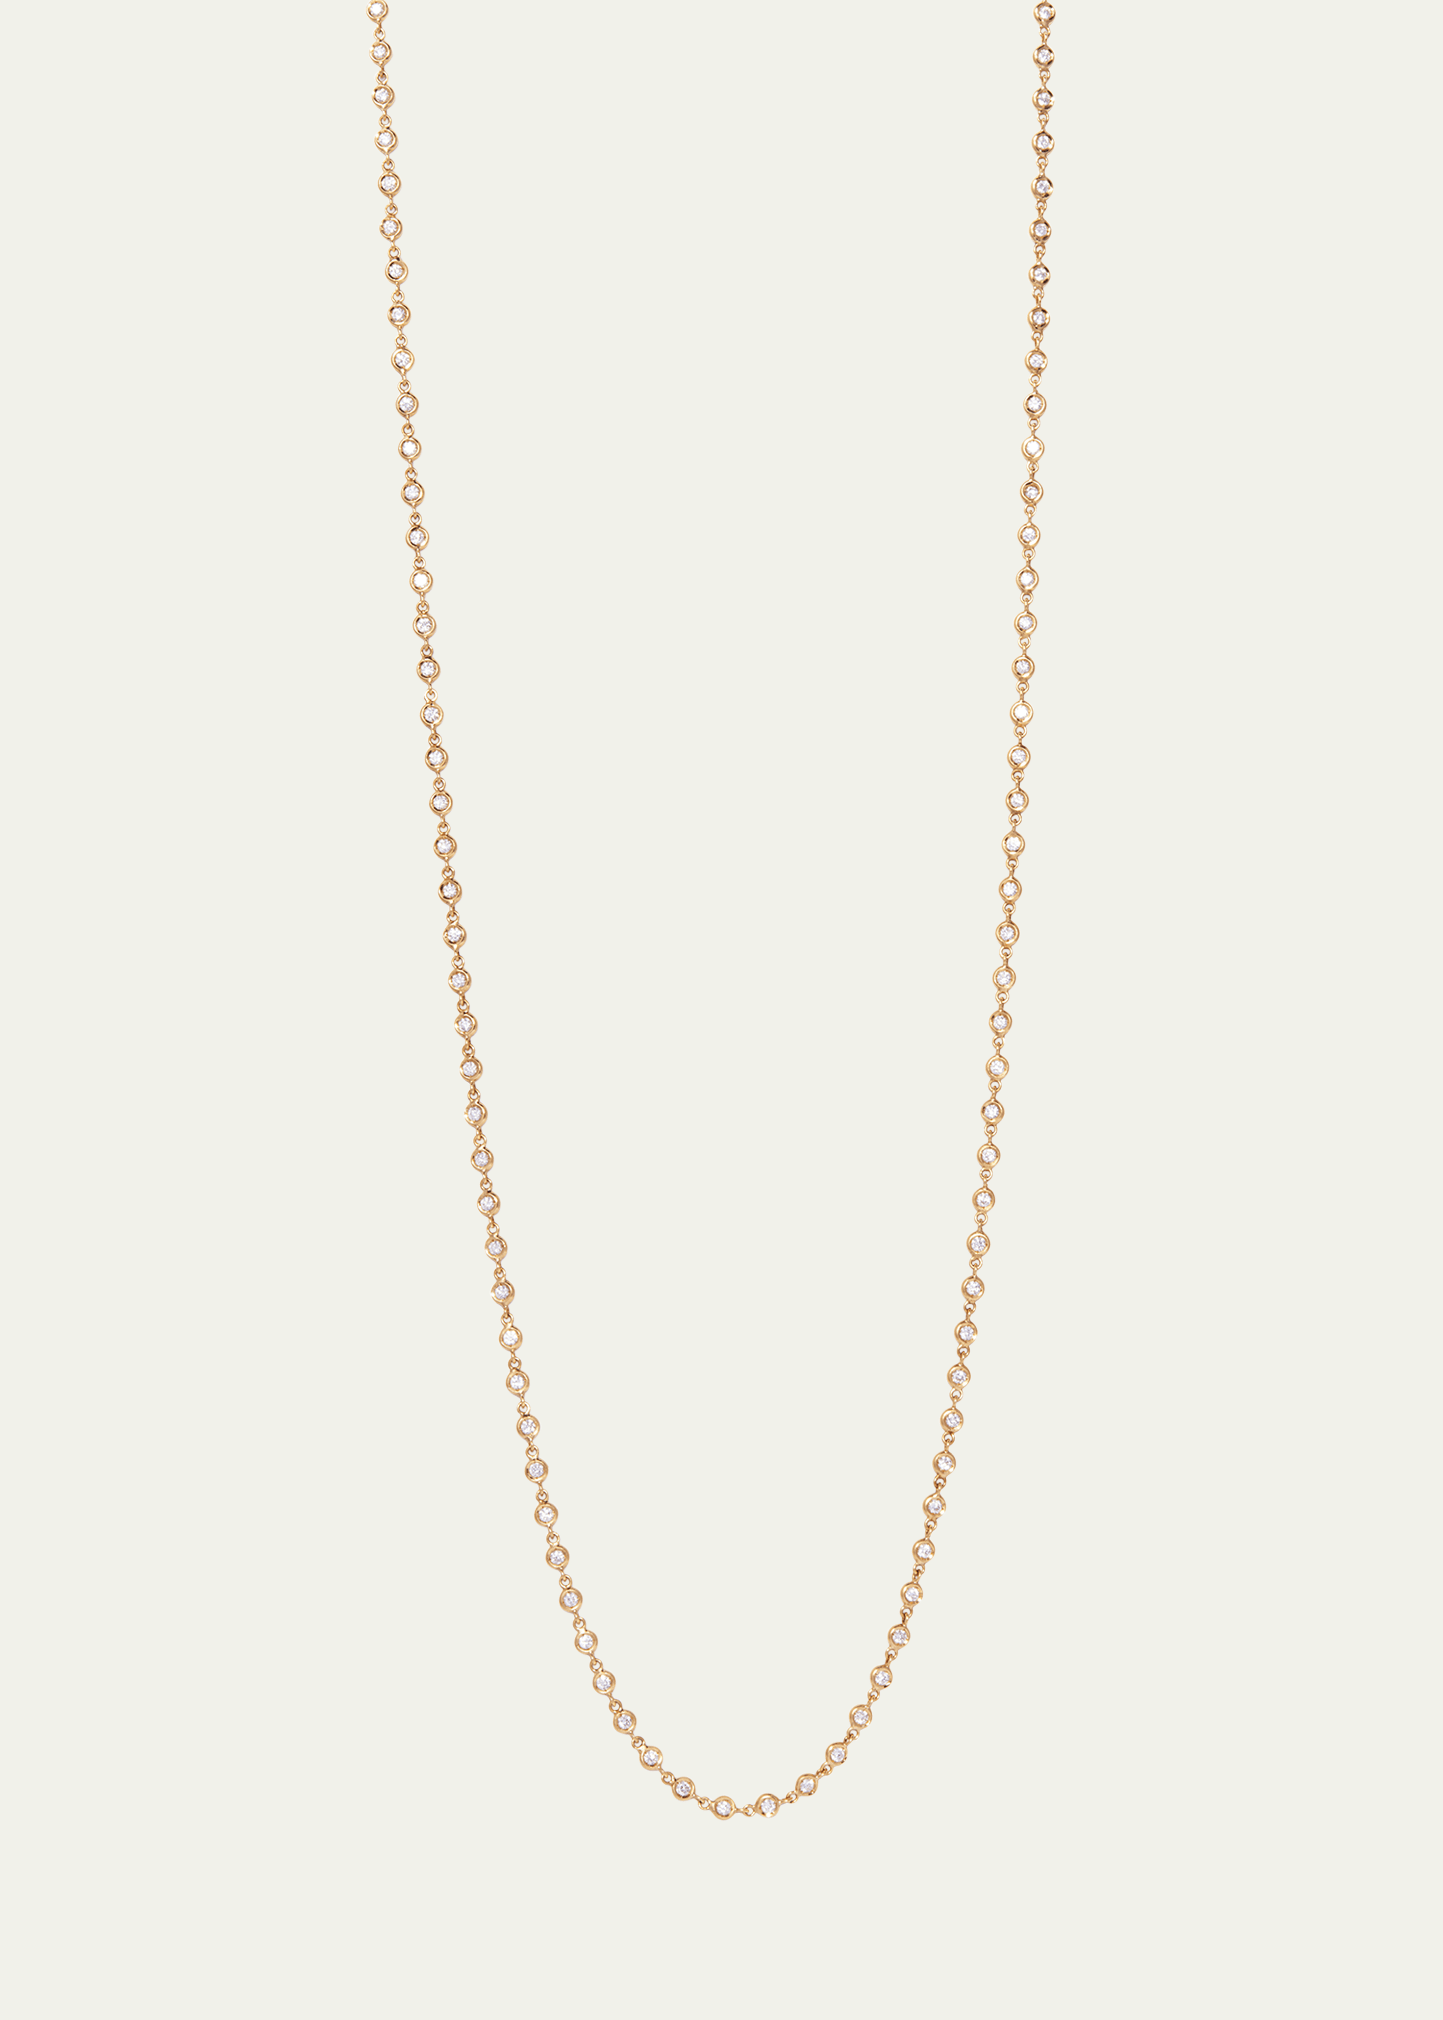 18K Yellow Gold Superlative Necklace with Diamonds